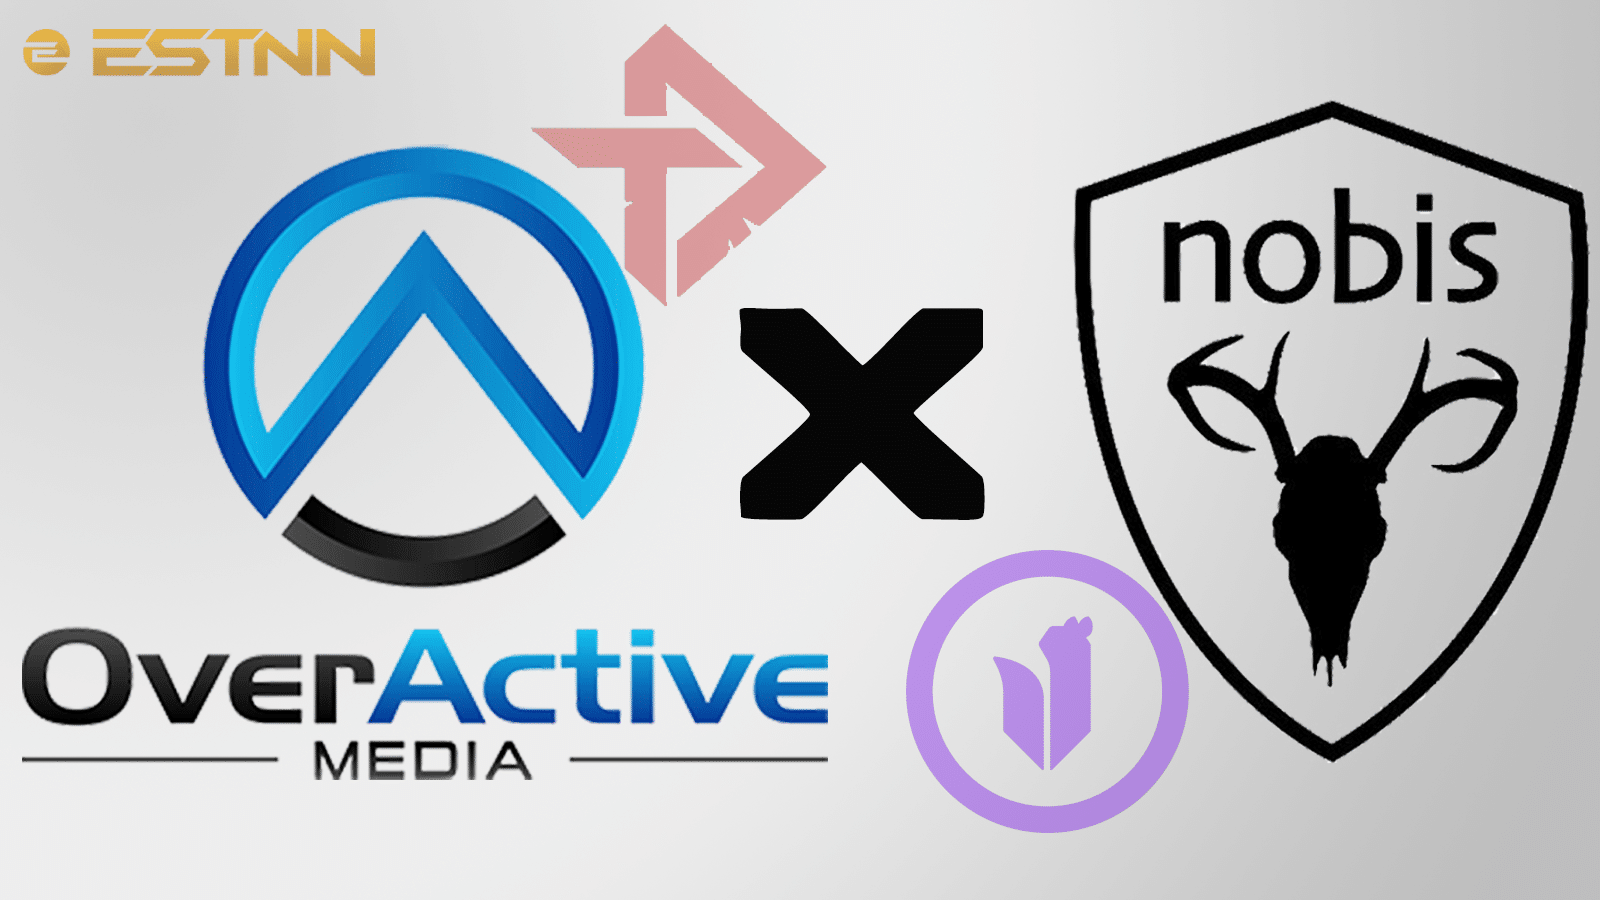 Brand logos from Overactive Media and Nobis appear alongside the Toronto Ultra and Toronto Defiant team logos